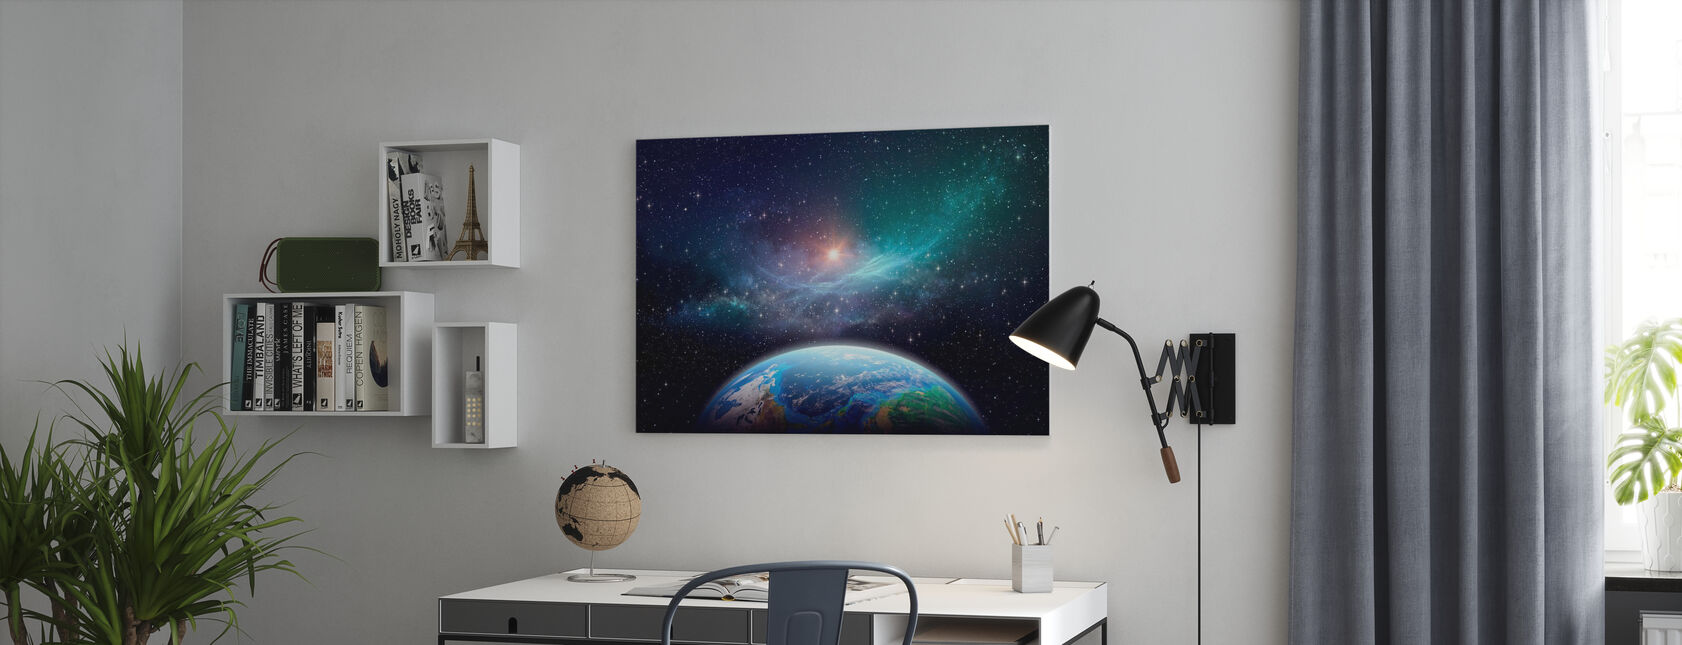 Exoplanet in Deep Space - Canvas print - Office